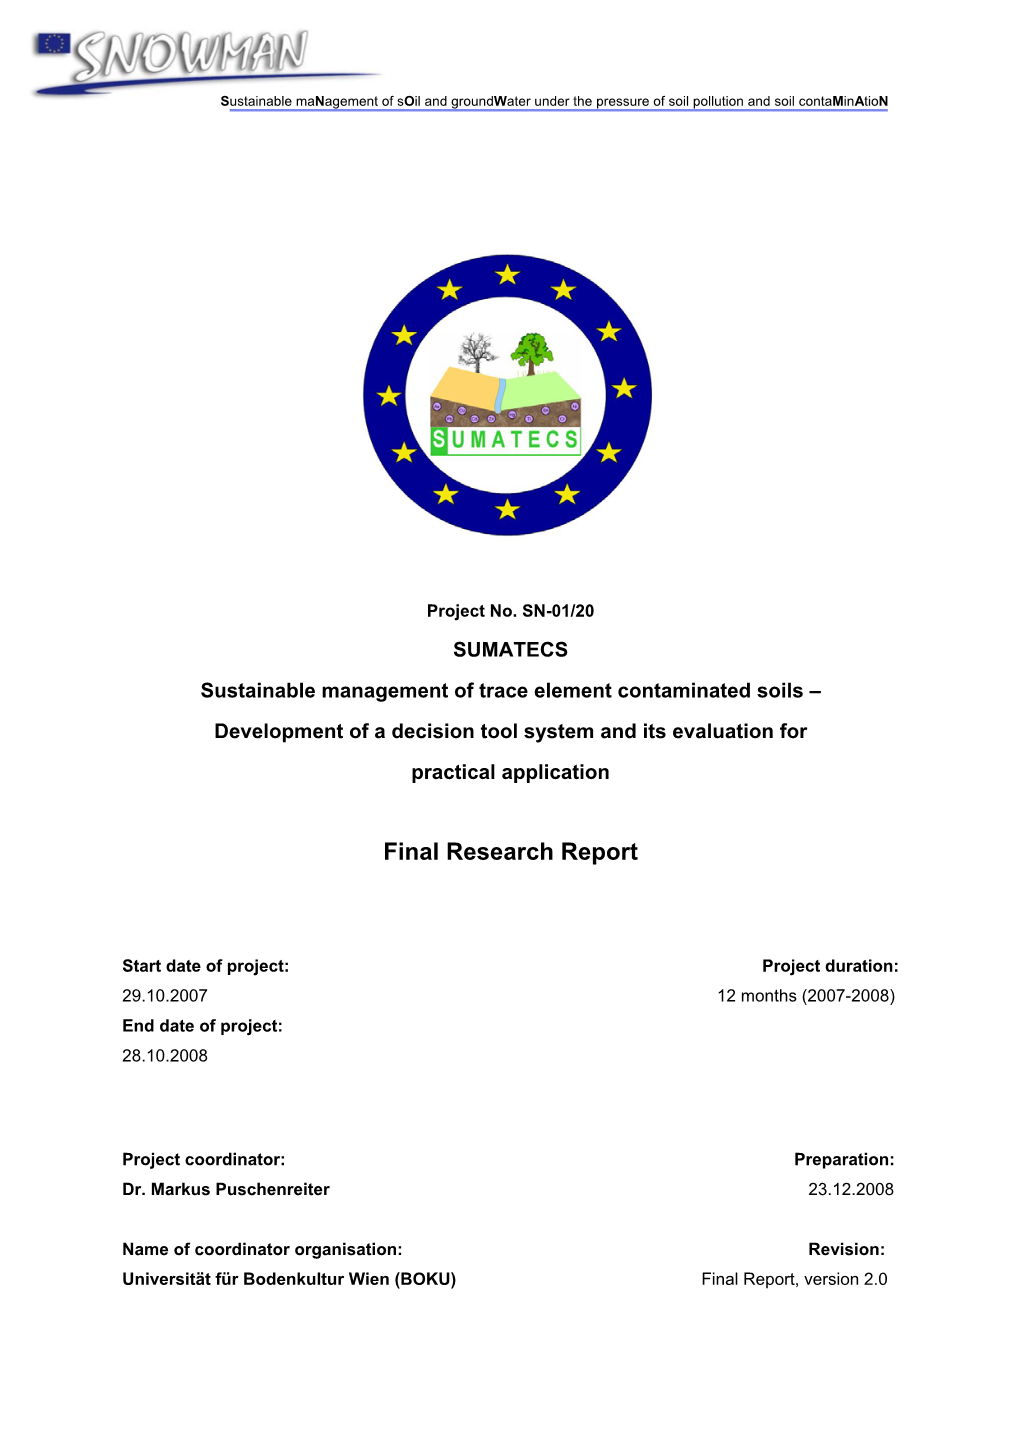 Final Research Report